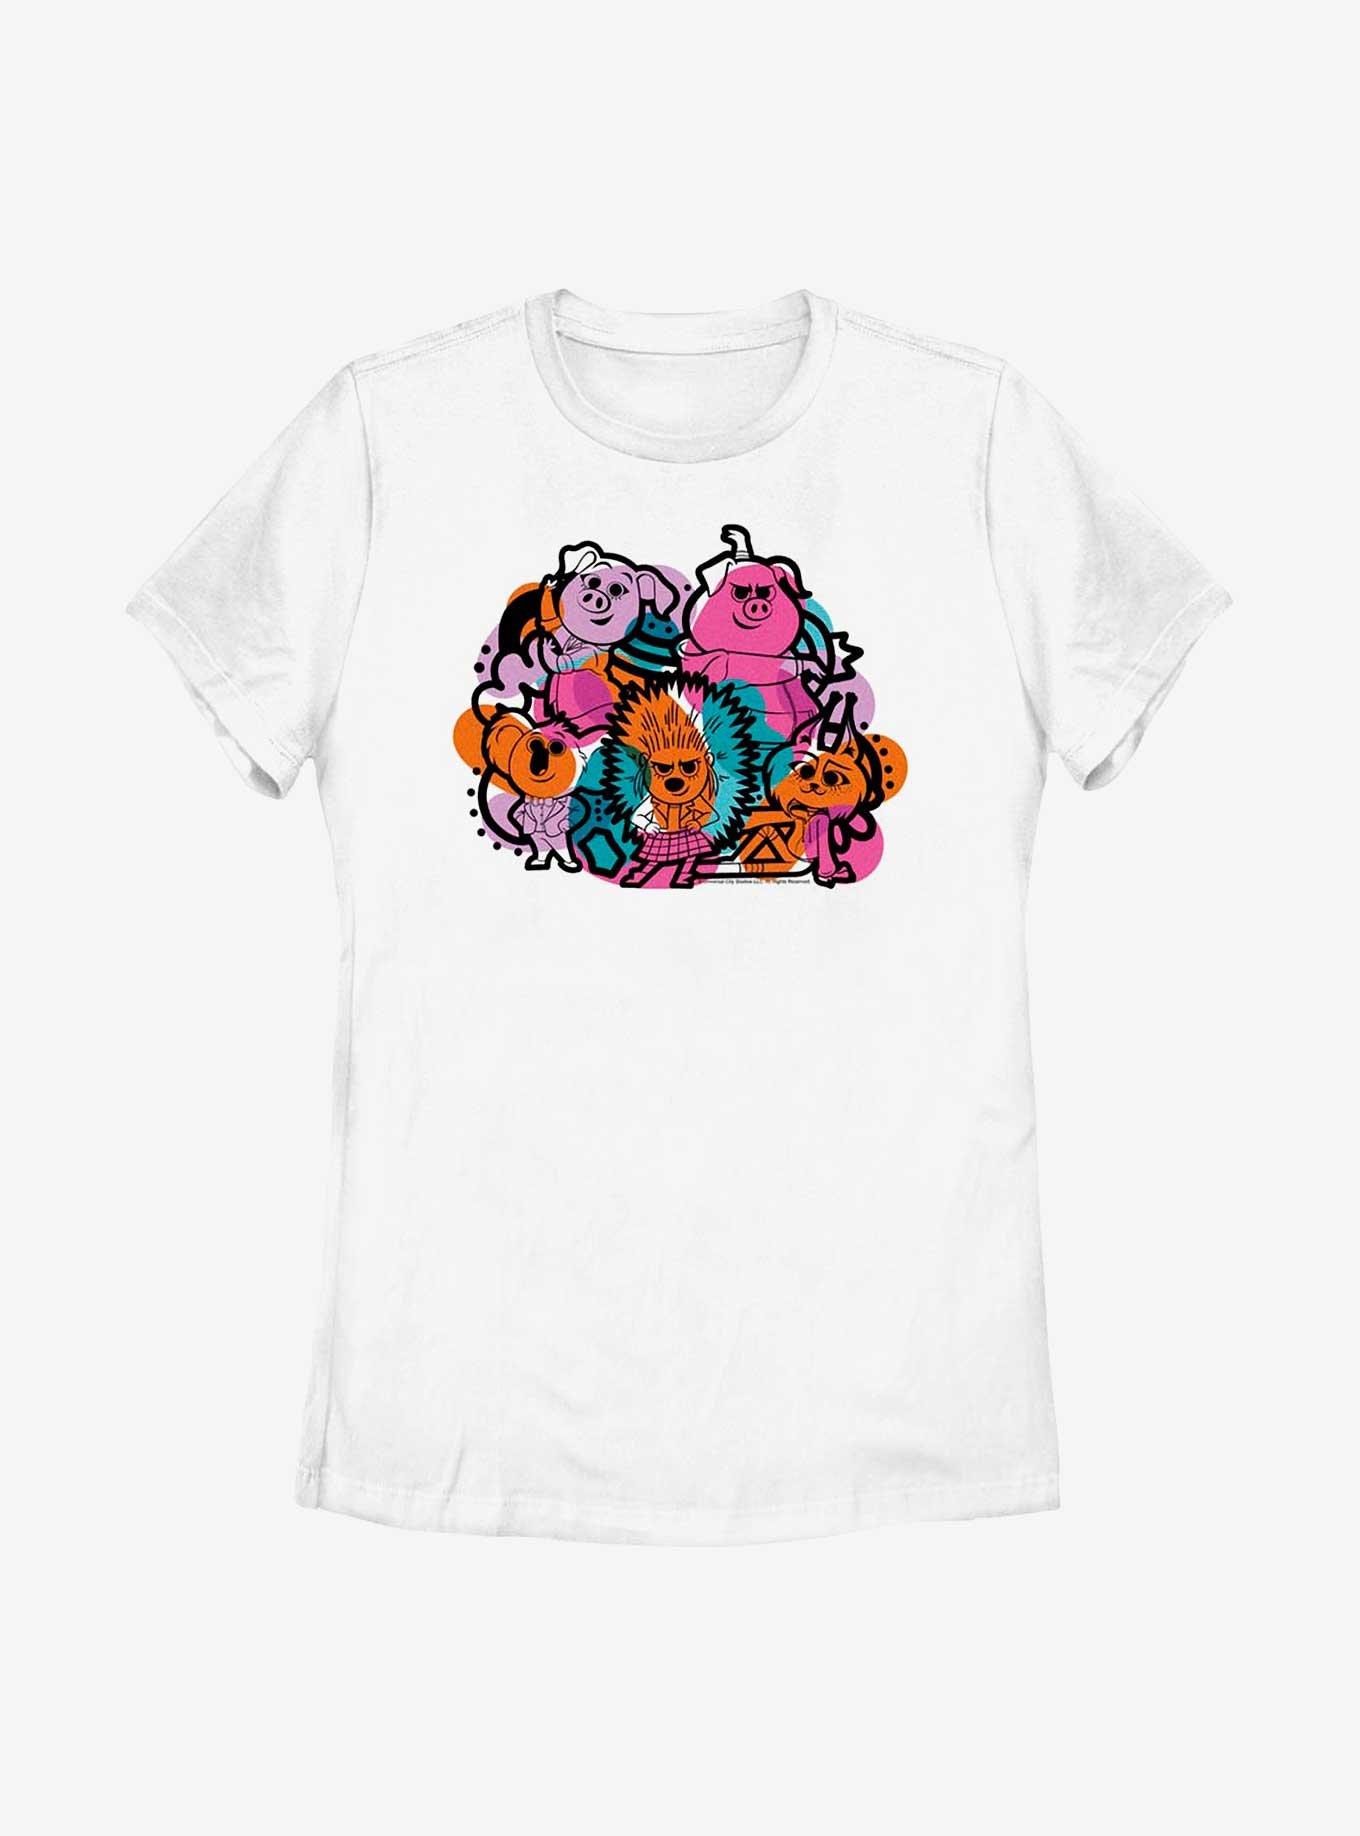 Sing Doodle Group Womens T-Shirt, WHITE, hi-res